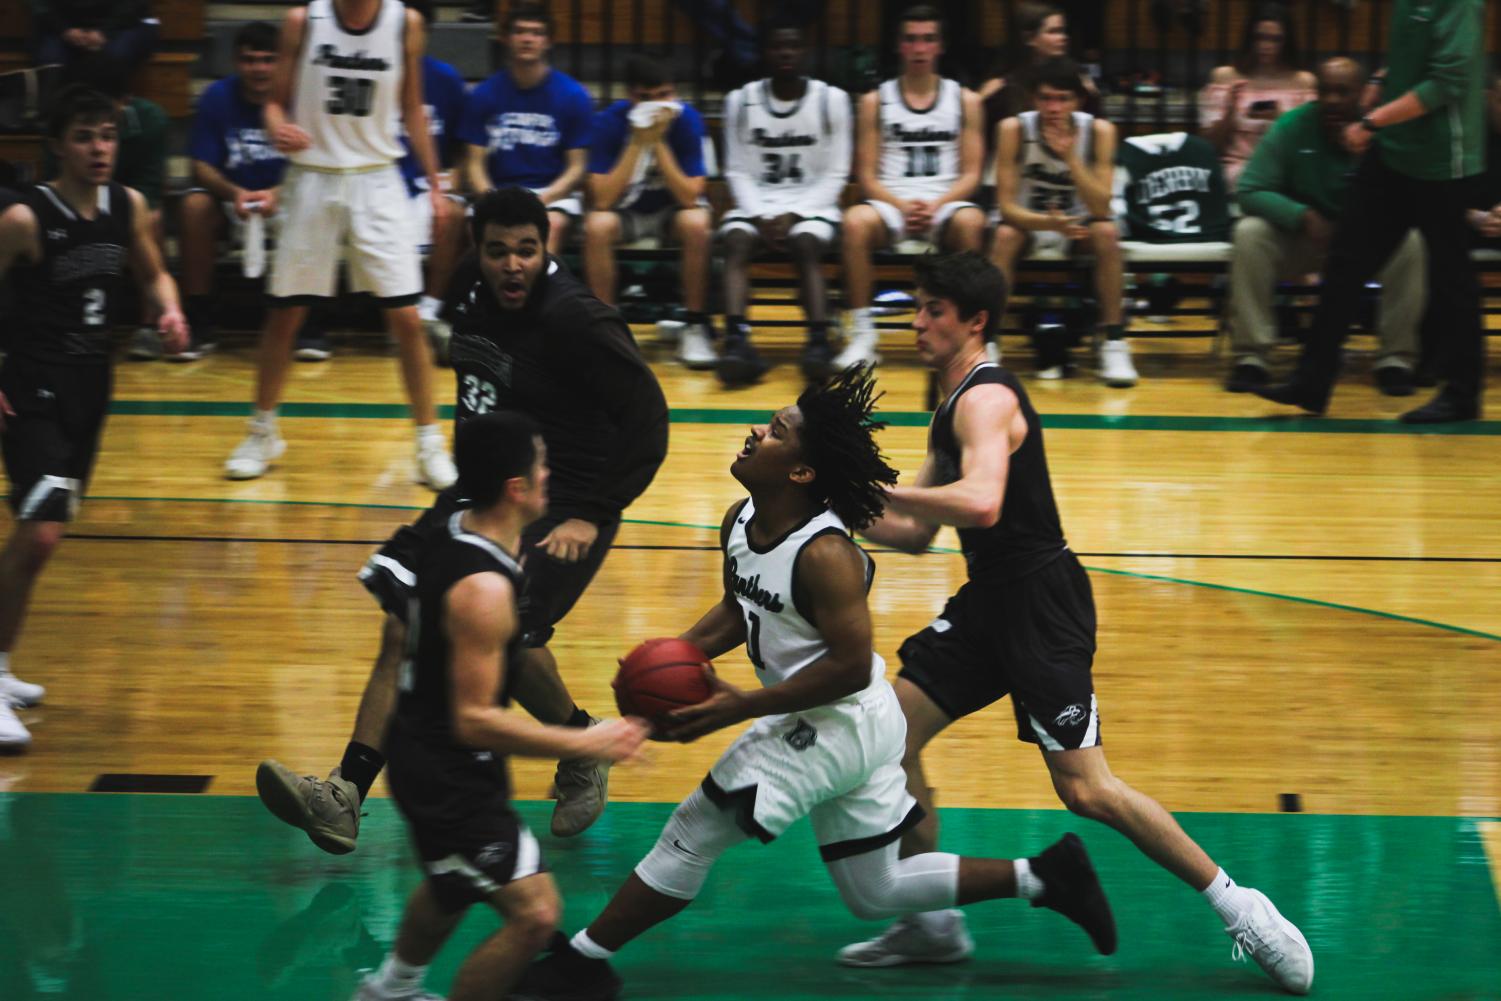 Derby+boys+basketball+win+sub-state+photo+gallery+%28photos+by+Tanner+Hopkins%29